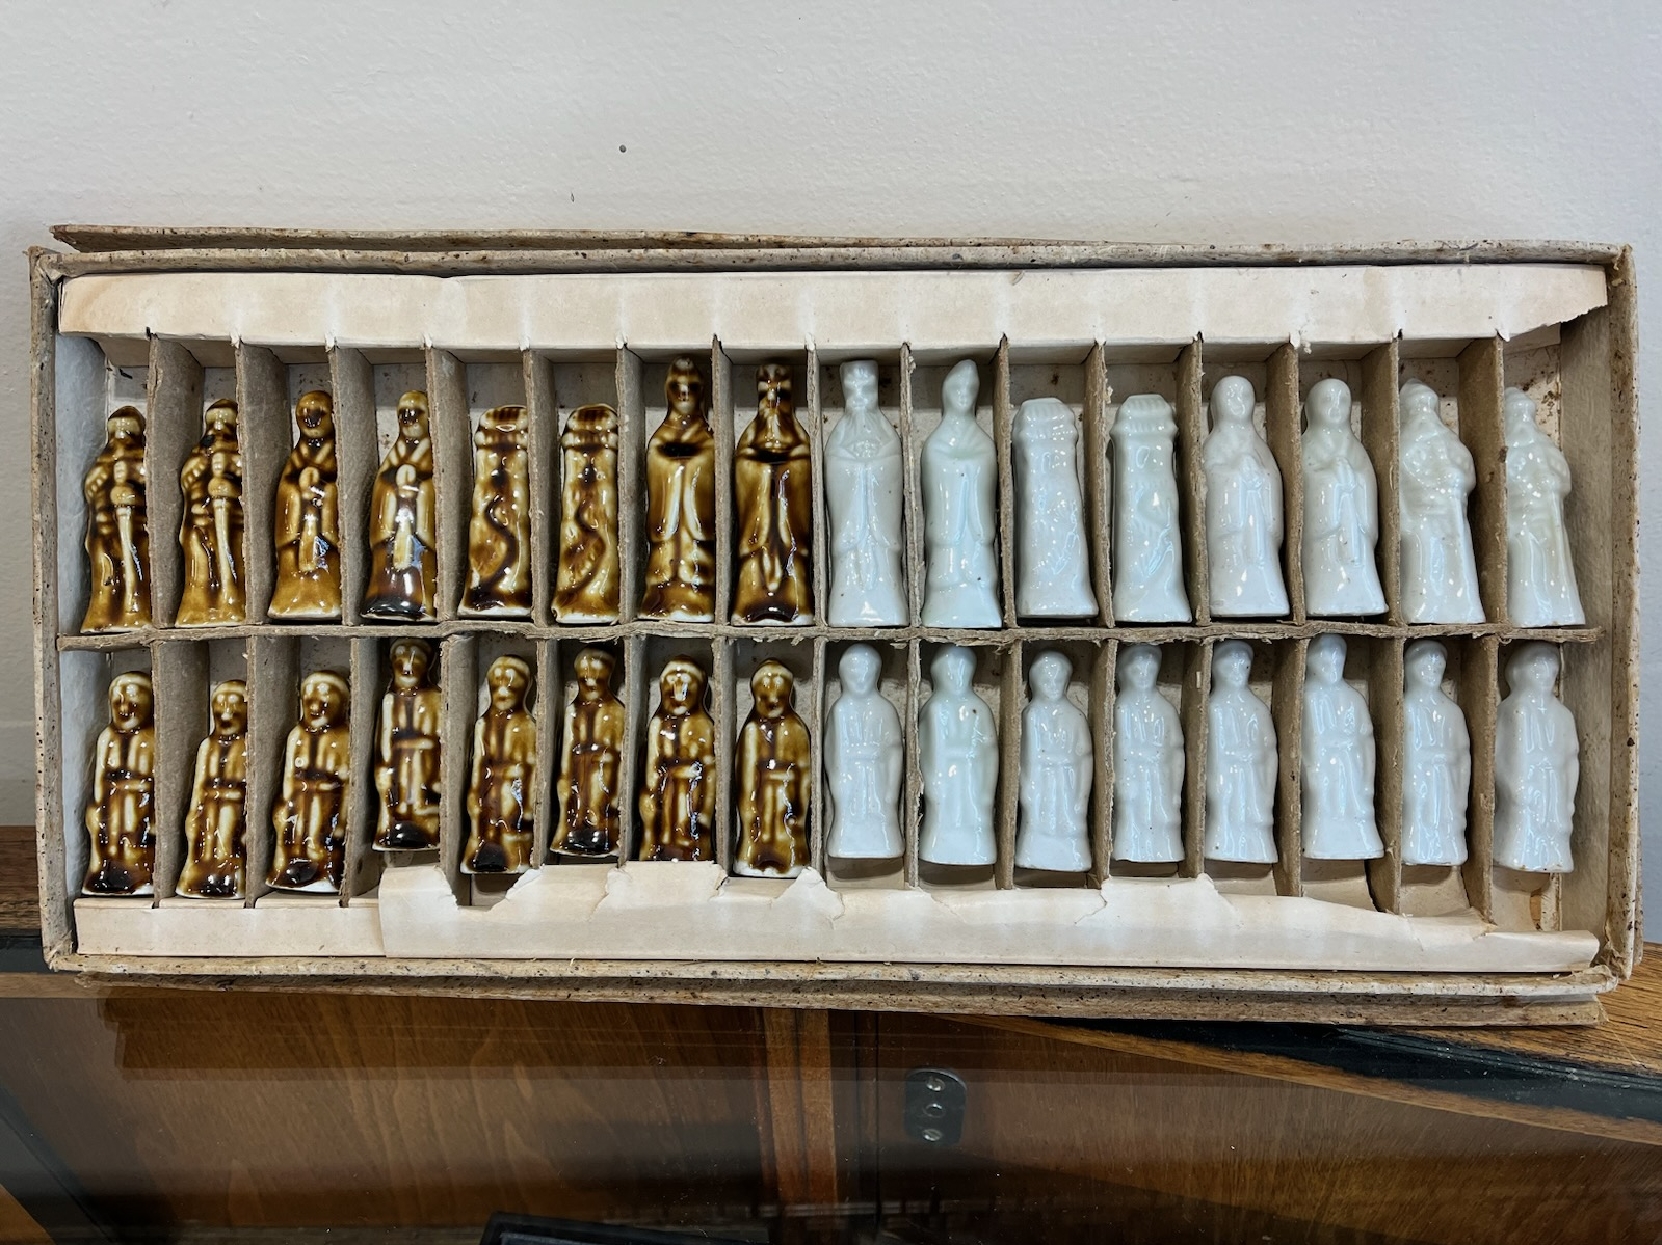 Vintage Chinese Chess Set in Ceramic